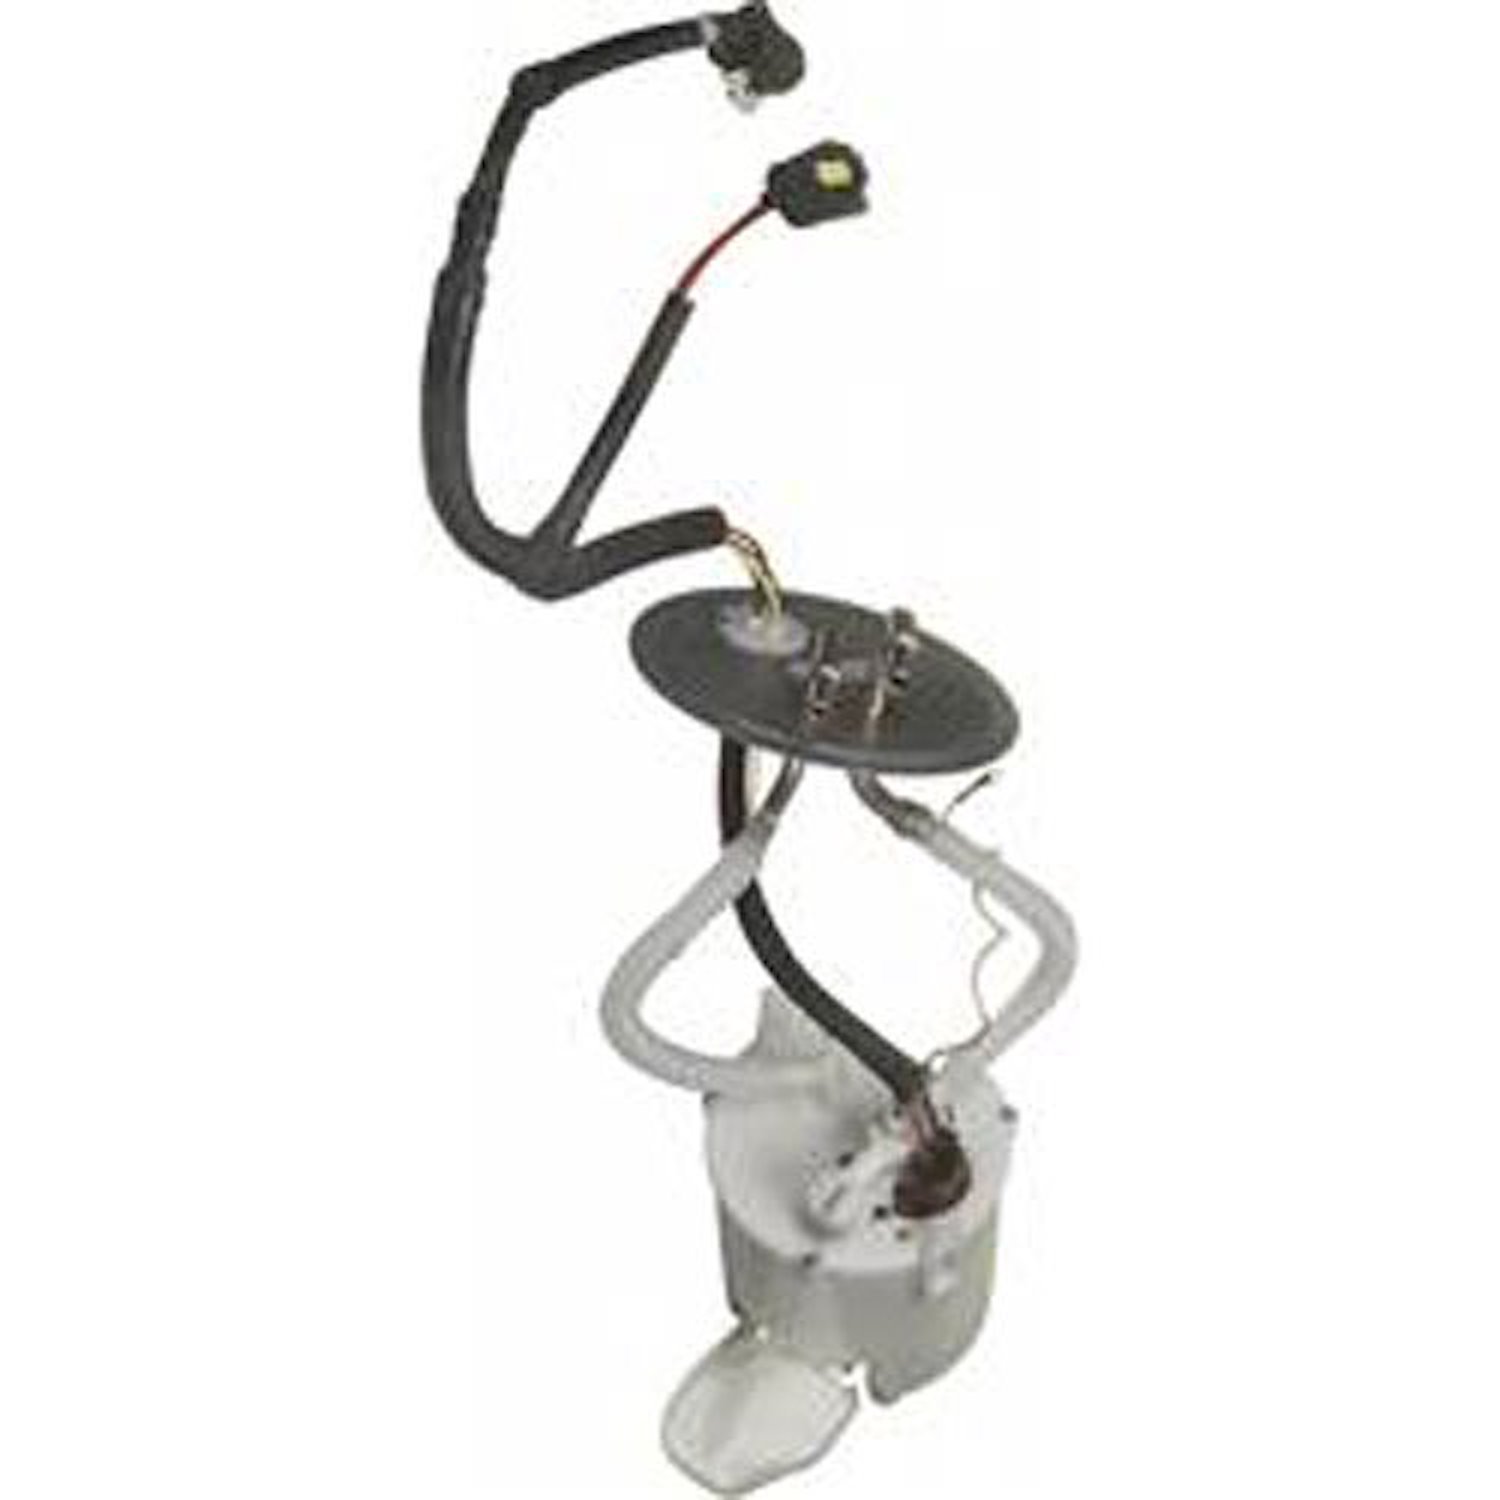 OE Ford Replacement Electric Fuel Pump Module Assembly 1997 Ford Taurus 3.0L V6